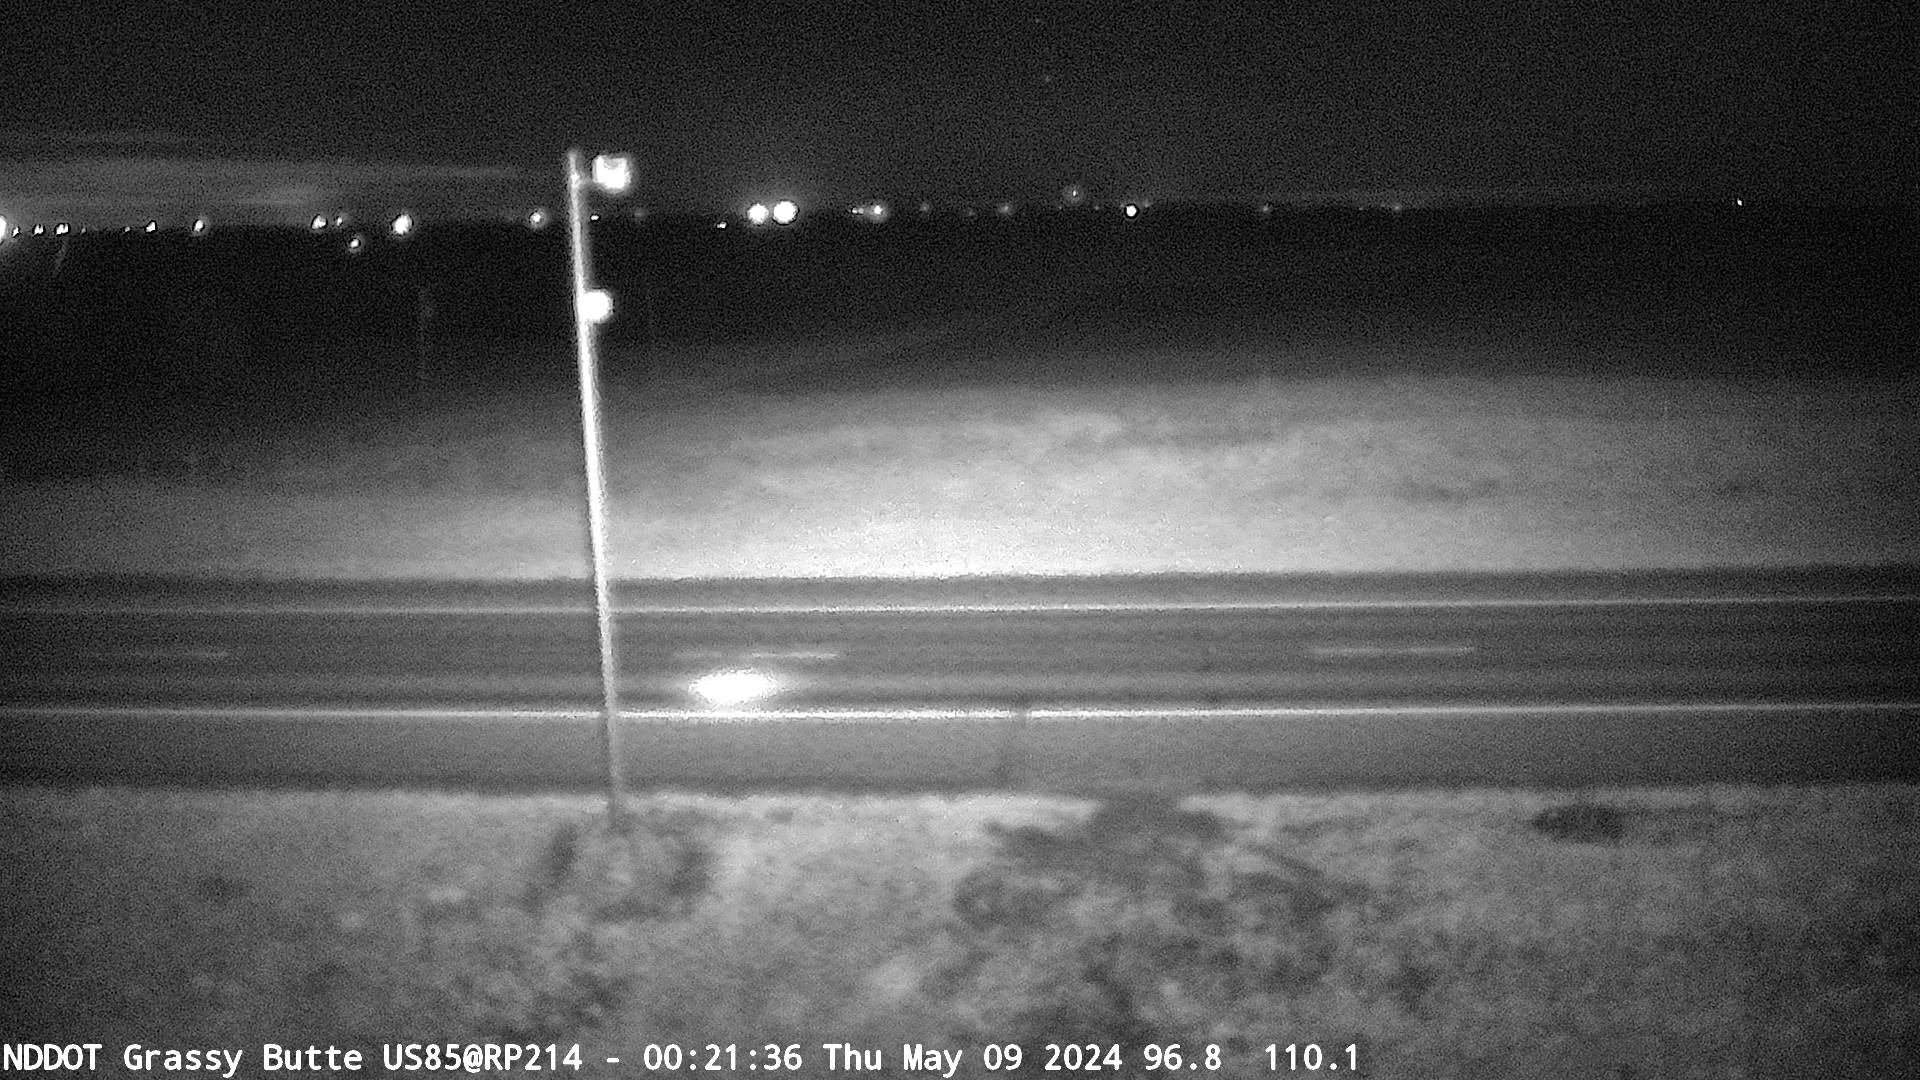 Grassy Butte - East (US 85 MP 113.7) - NDDOT